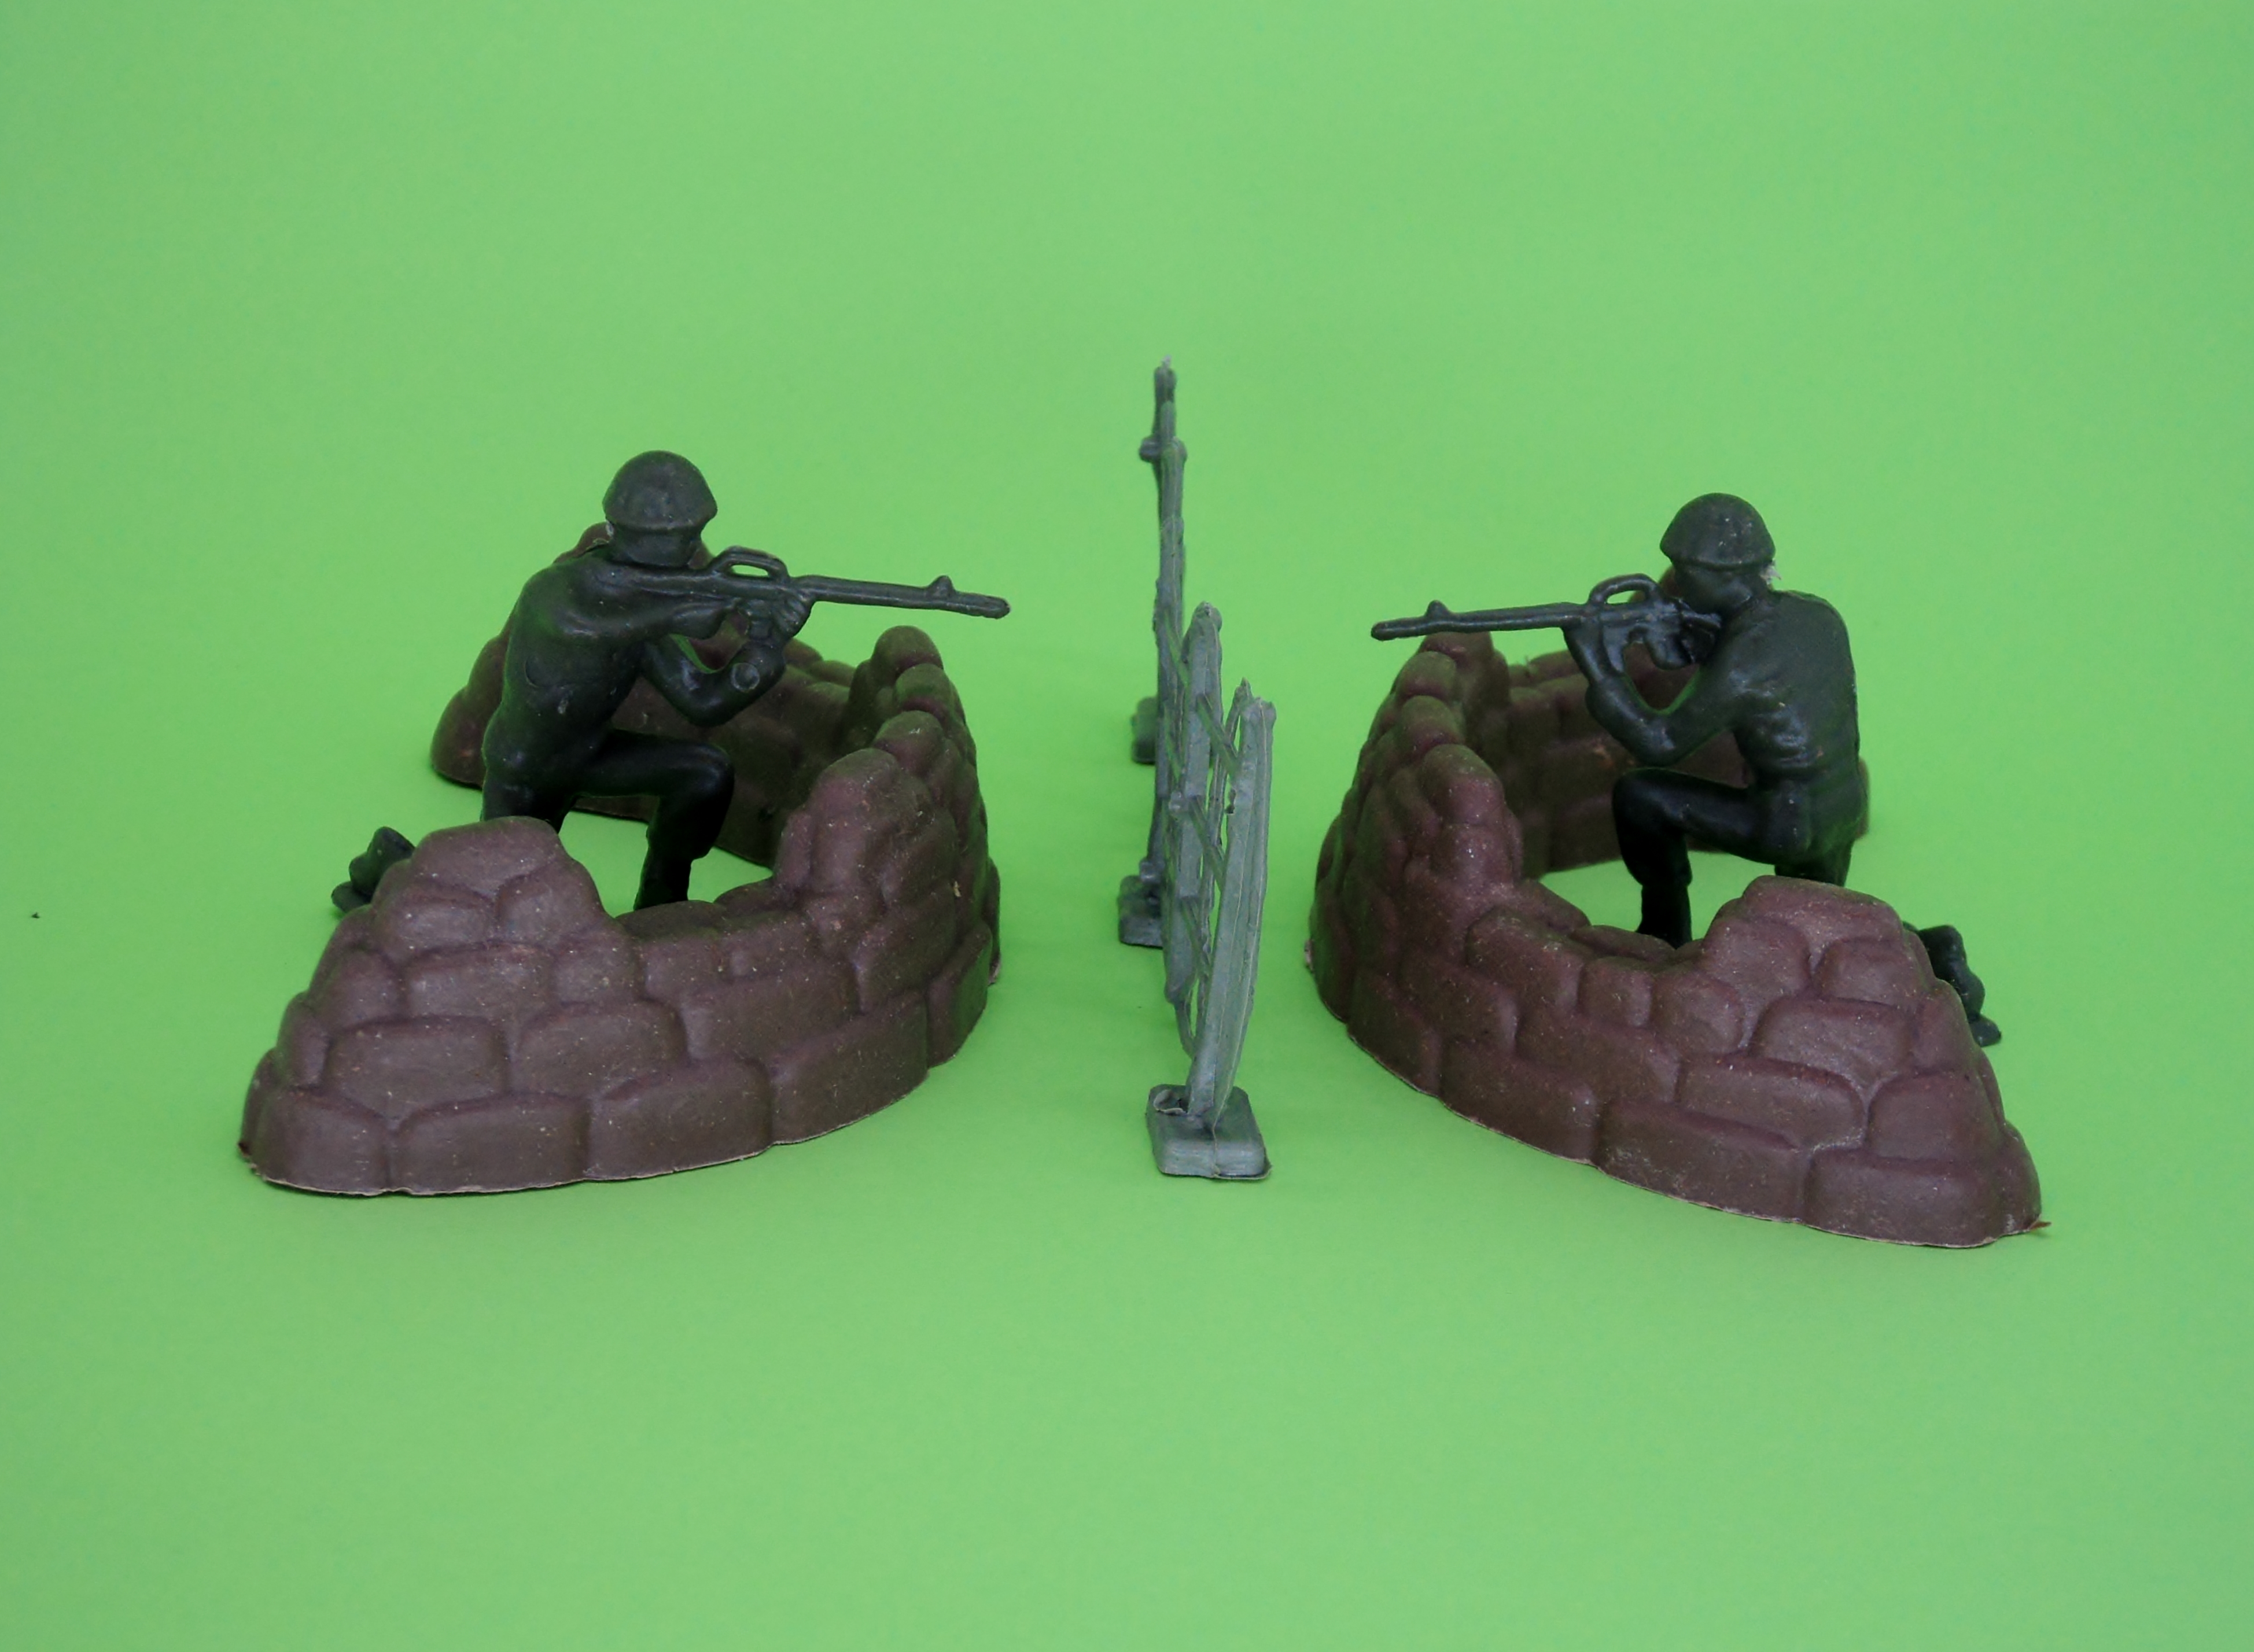 War toys, Plastic, Soldiers, Toys, War, HQ Photo